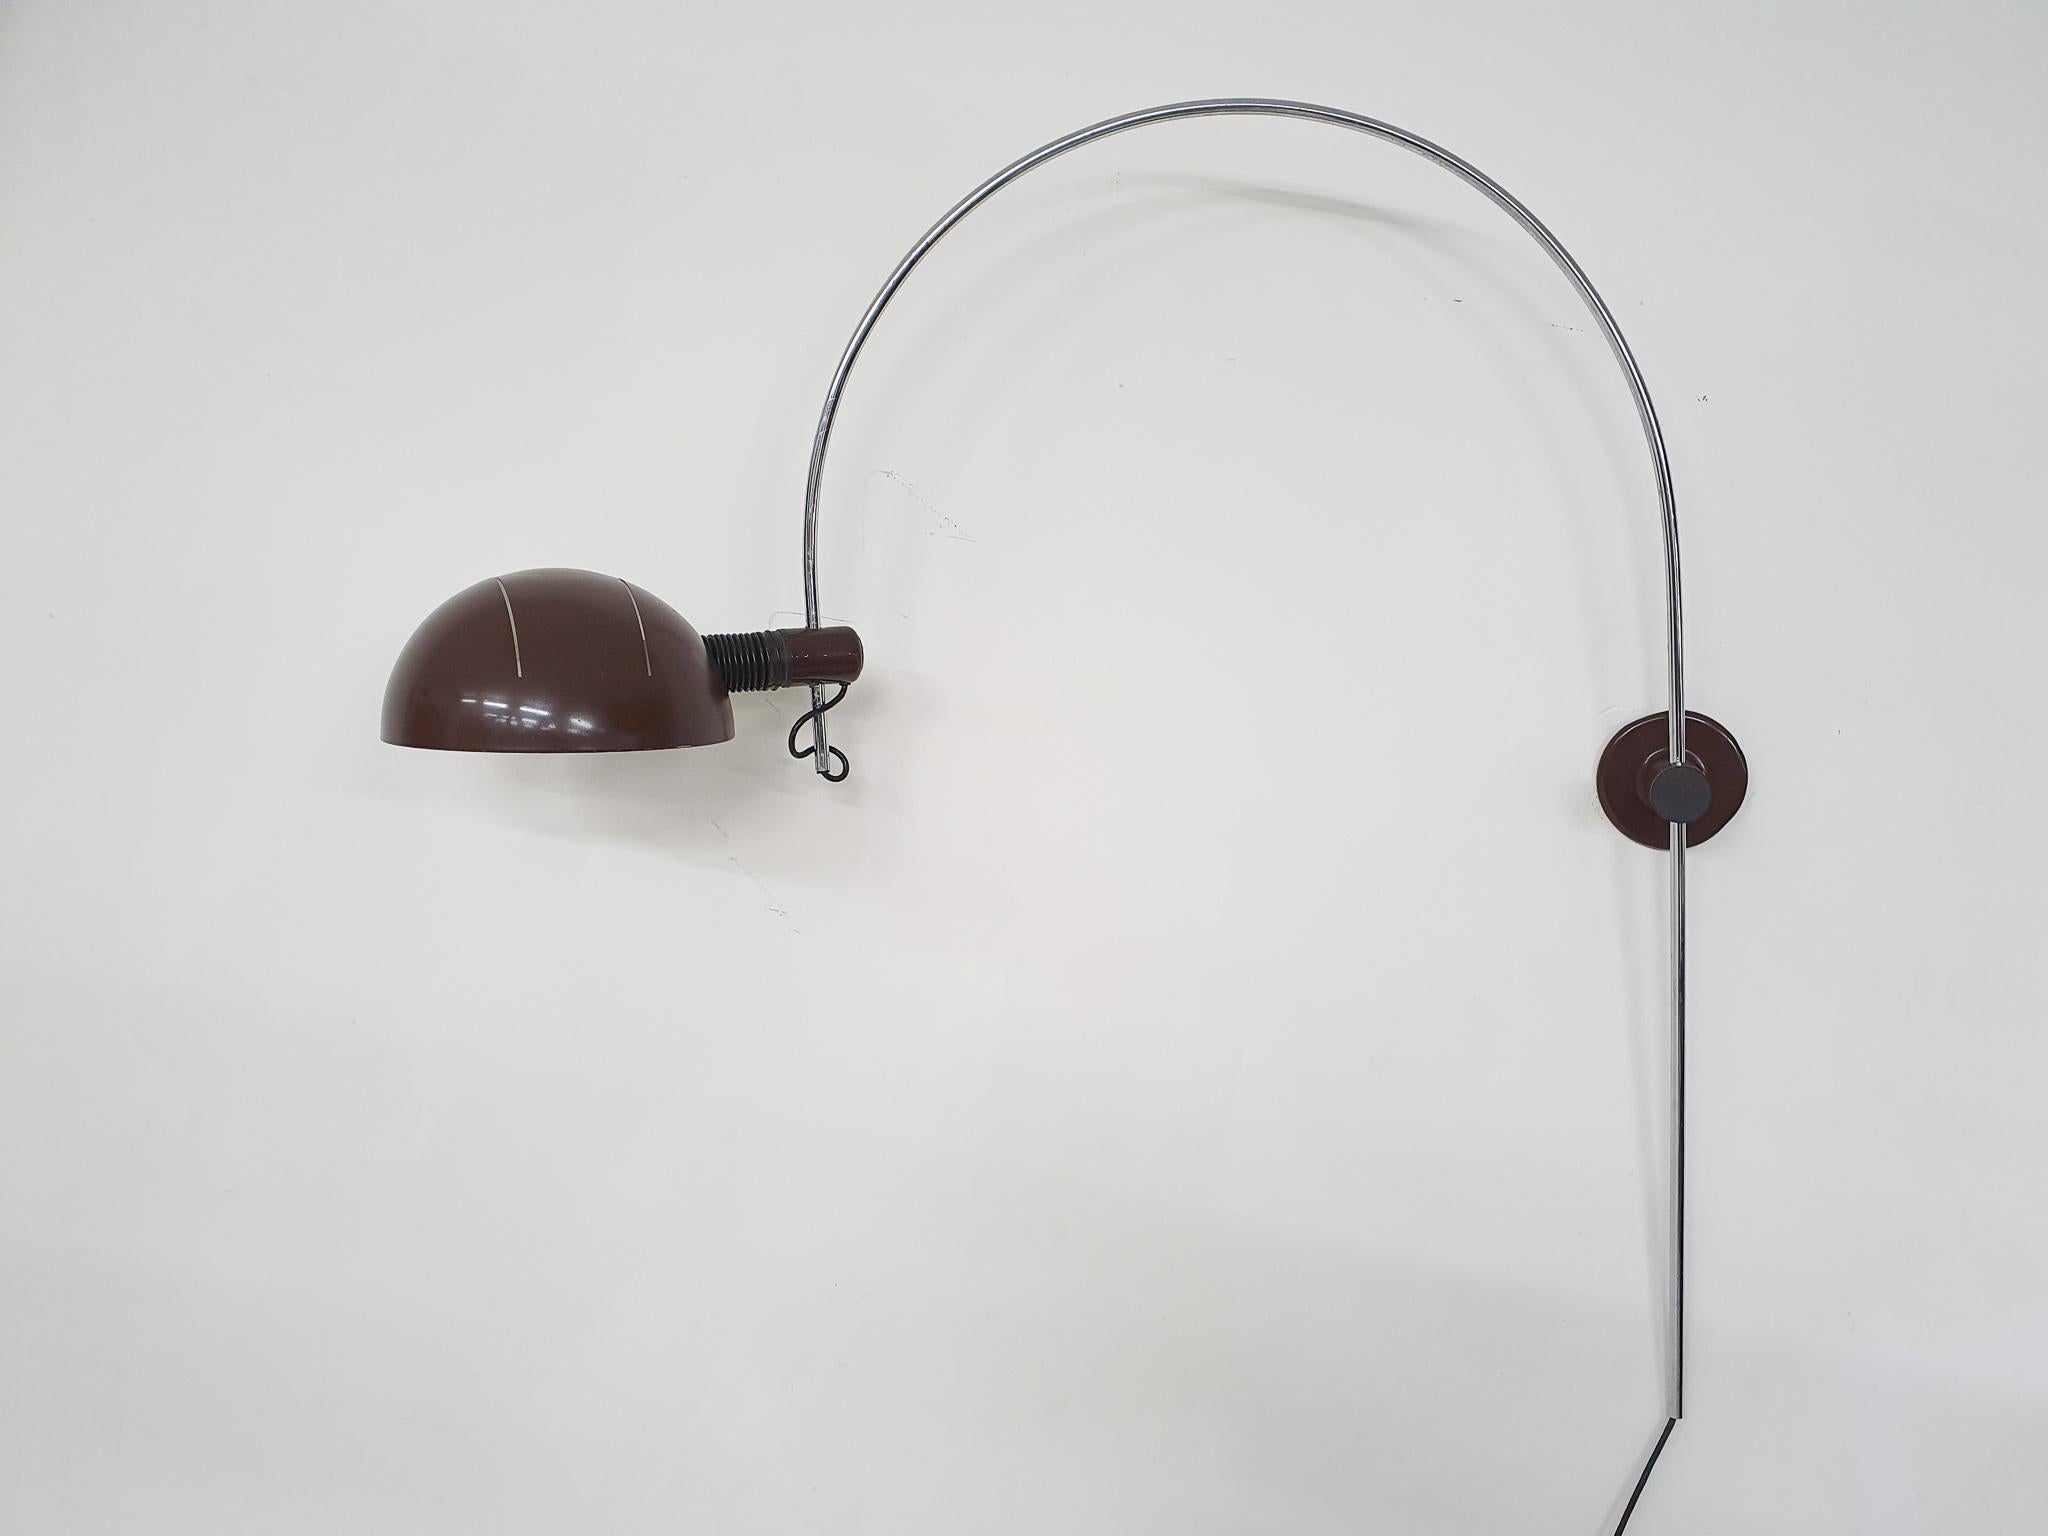 Chrome arc wall light and brown globe metal lamp shade.
The brown parts have been repainted.
The rubber on the back to cover the light switch, has burst open.
With EU plug.

